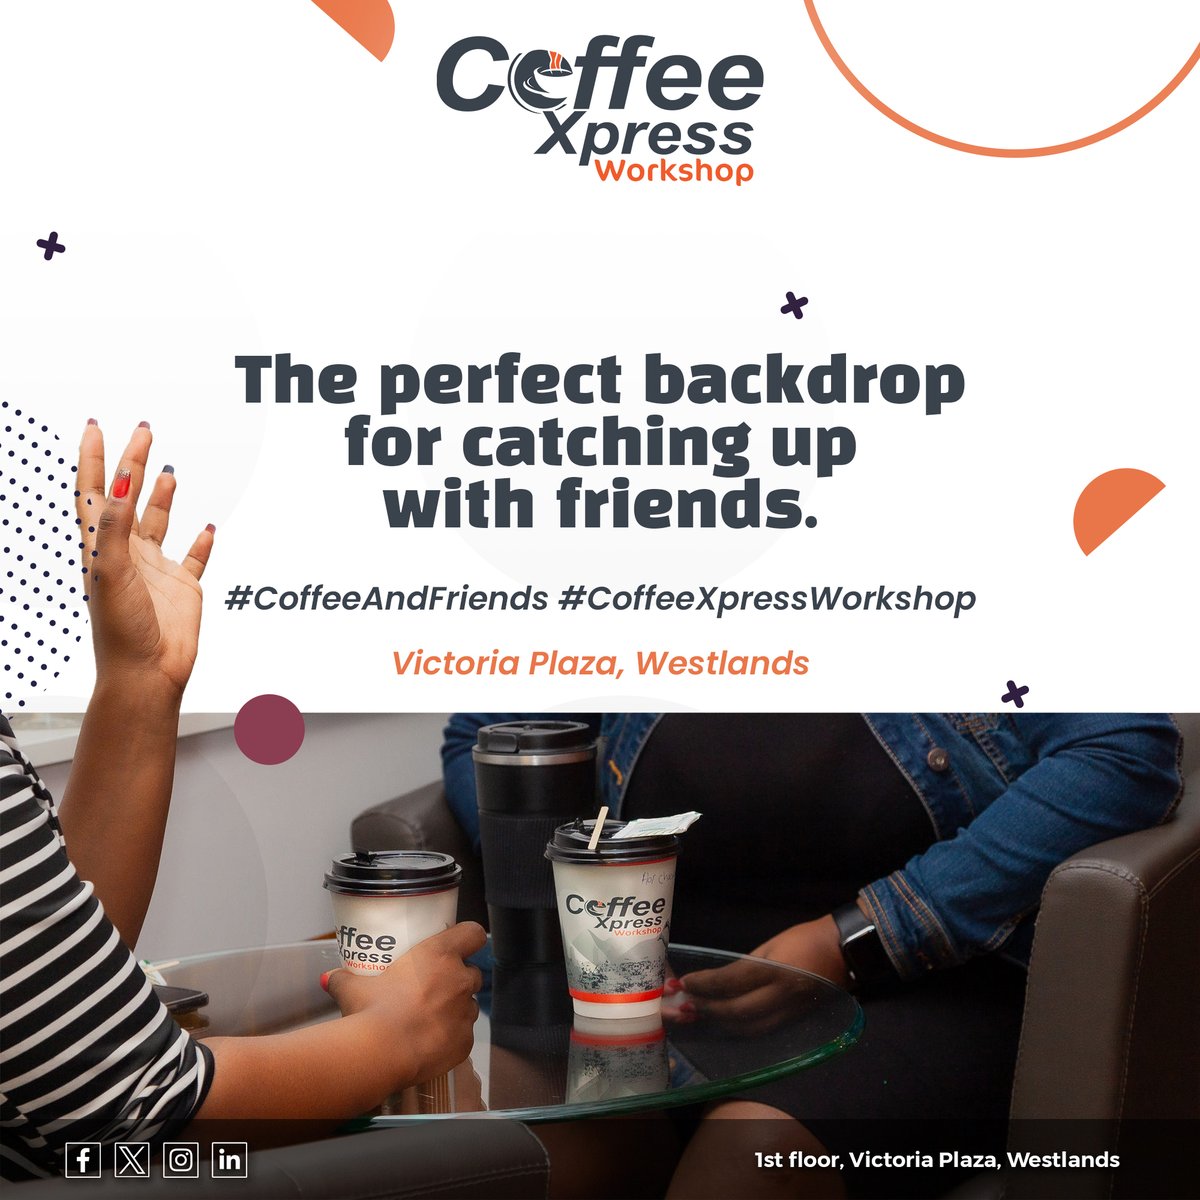 Step into our cozy haven and unwind with your favourite brew.

#CoffeeAndFriends #CozyVibes #CoffeeXpressWorkshop #coffeevibes☕️ #coffeetime #coffeeshop #coffeeplacewestlands #coffeetime #coffeelover #westlandscoffeeshop #coffeedaily #coffeebreak #coffeehouse #coffeeoftheday